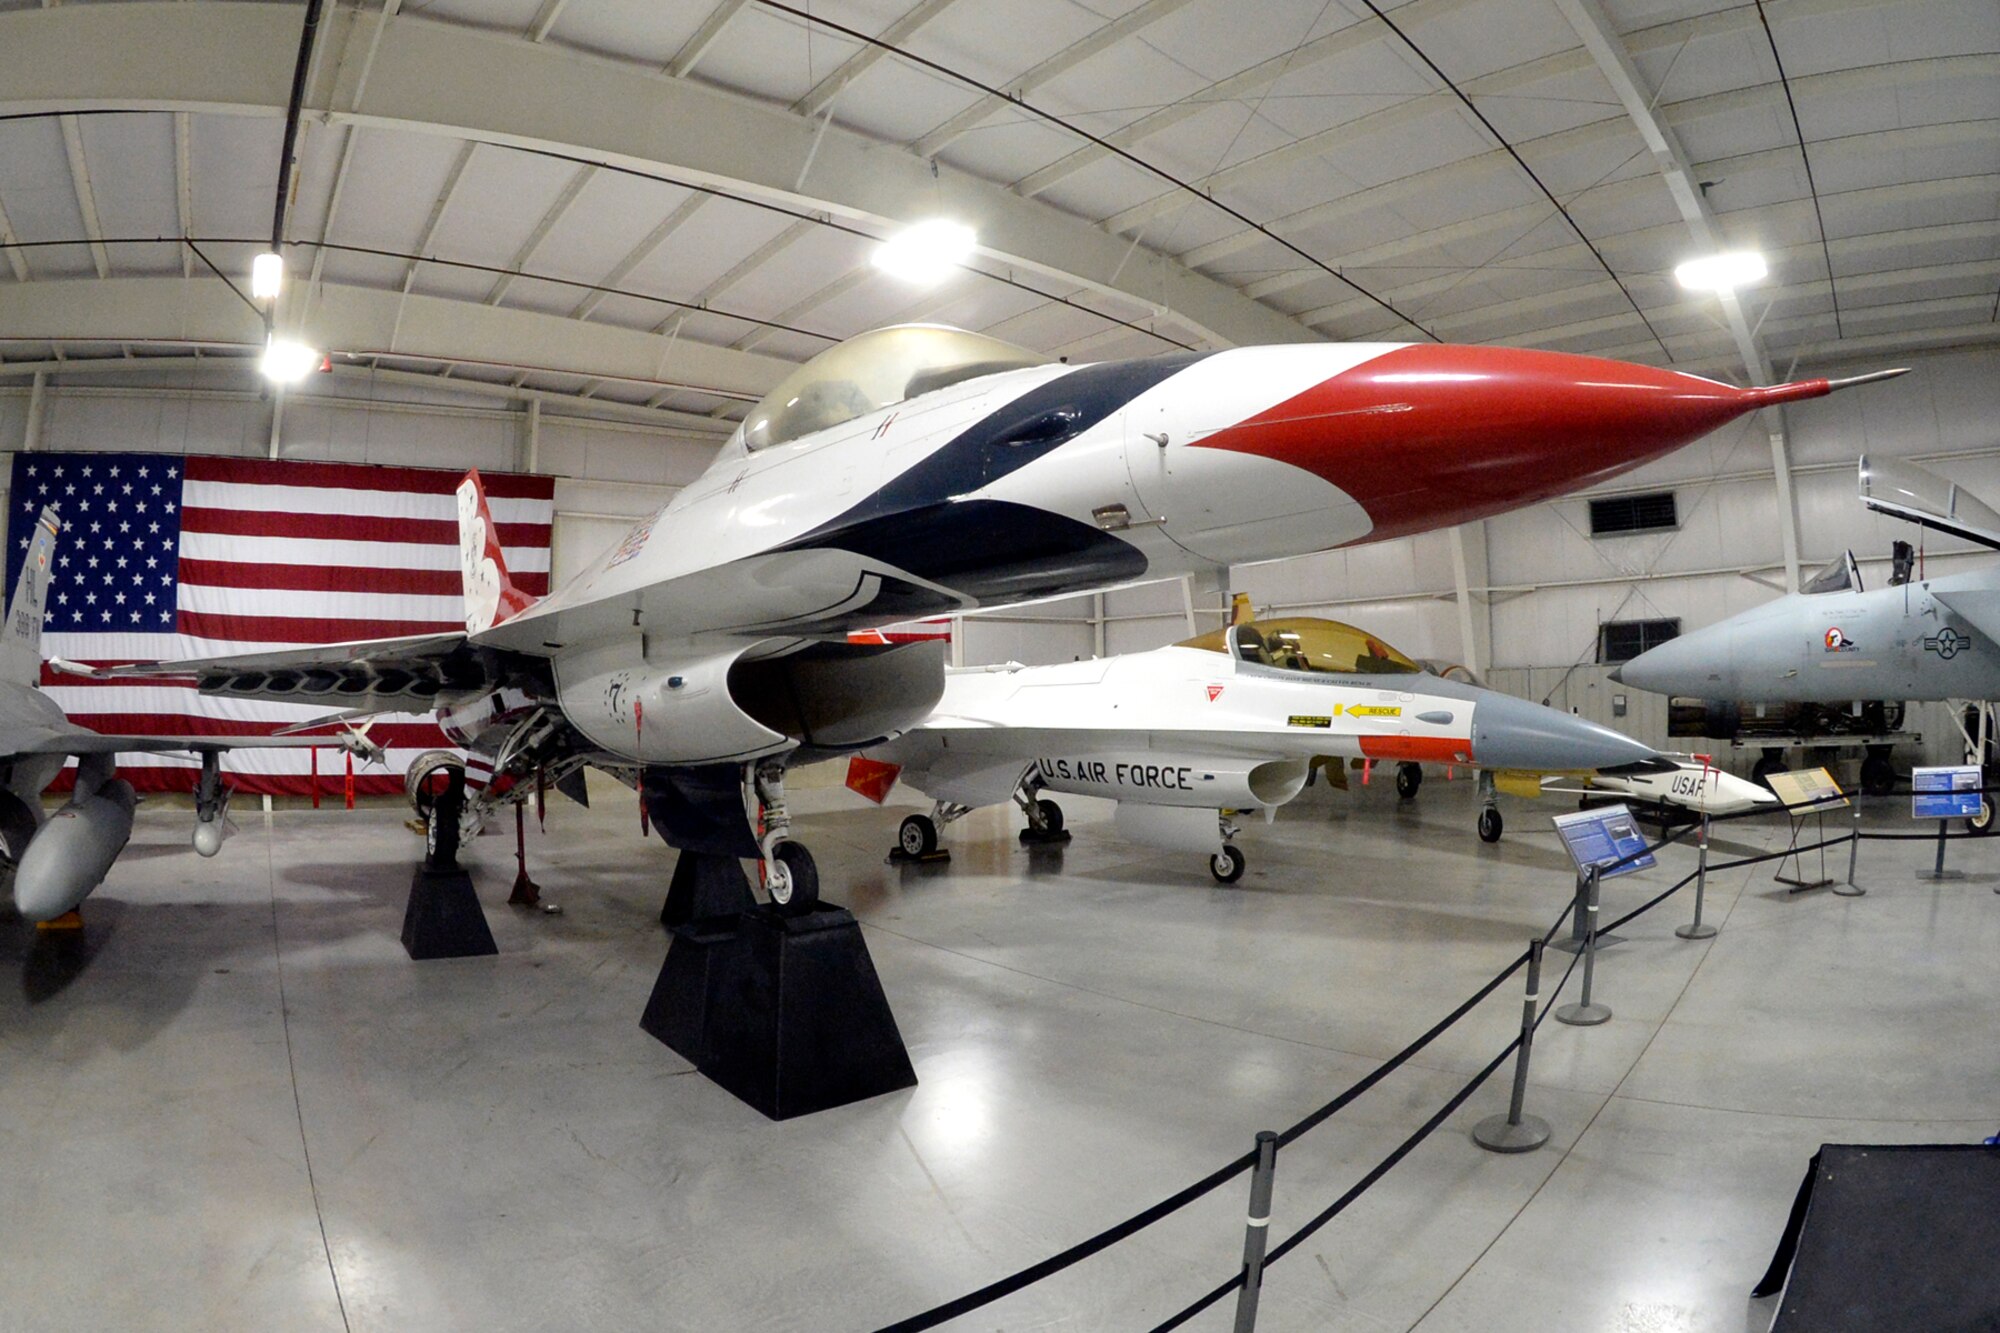 A Thunderbird F-16A Fighting Falcon flown by the U.S. Air Force Thunderbirds aerial demonstration team from 1983-1992 is on display June 1, 2018, at the east end of the Hill Aerospace Museum’s Fighter Gallery at Hill Air Force Base, Utah. The aircraft restoration took several months to complete and will be formally unveiled during a private ceremony in conjunction with the Warriors Over the Wasatch Air and Space Show June 23-24 at Hill. (U.S. Air Force photo by Todd Cromar)